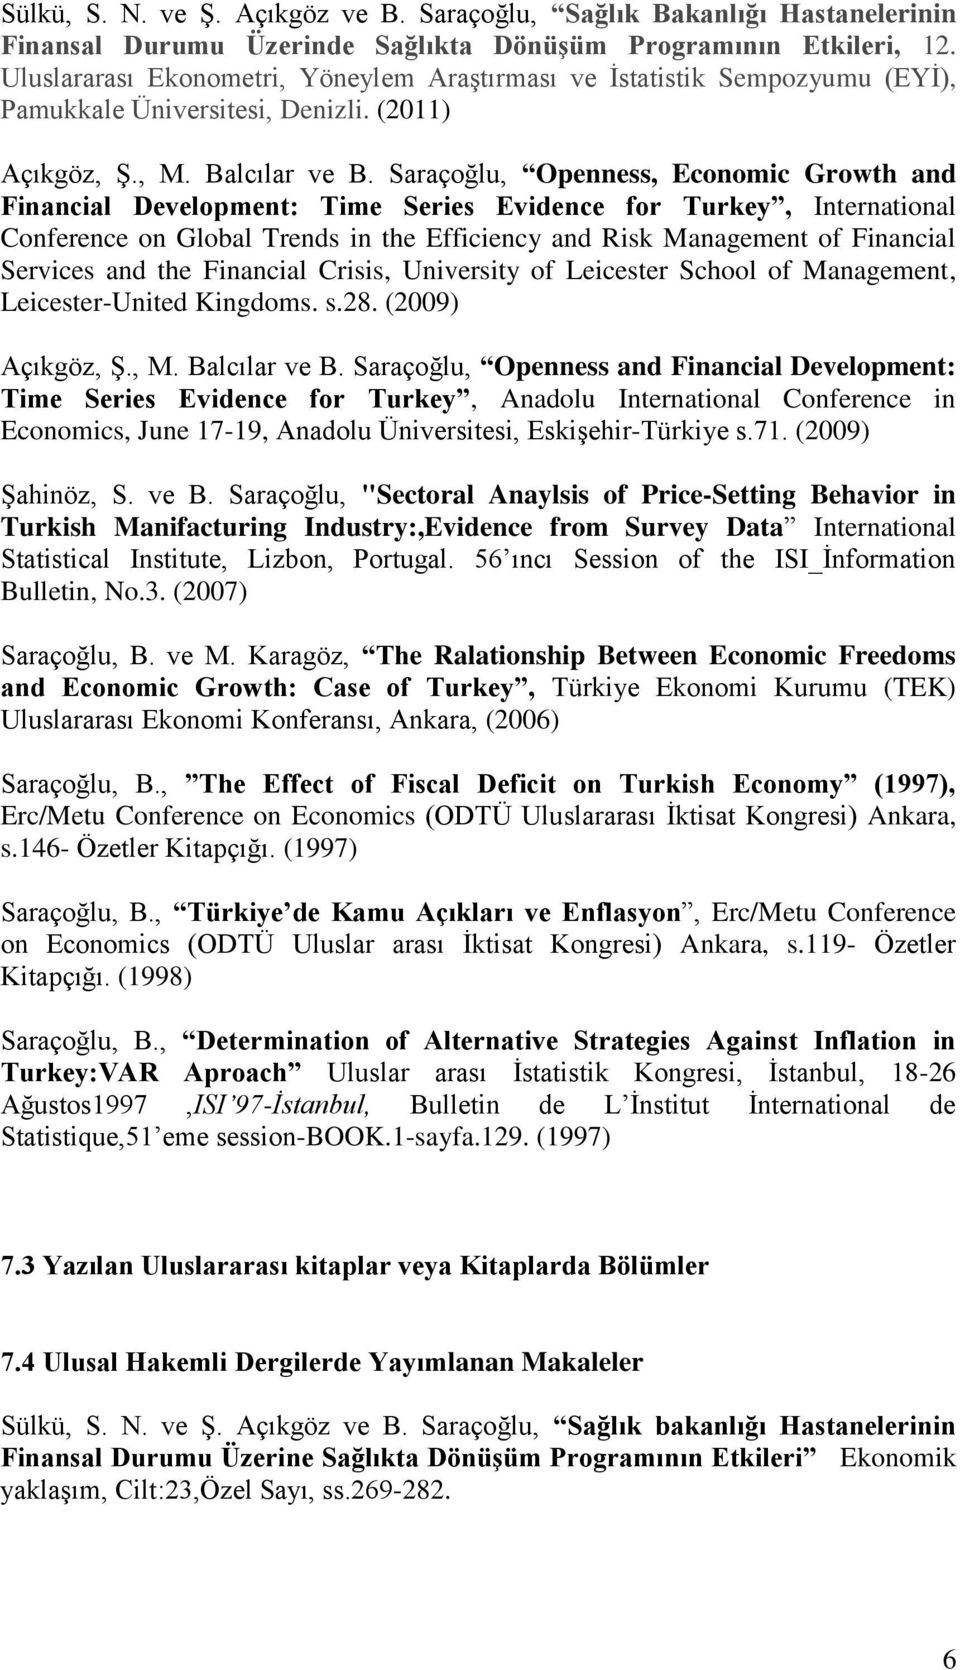 Saraçoğlu, Openness, Economic Growth and Financial Development: Time Series Evidence for Turkey, International Conference on Global Trends in the Efficiency and Risk Management of Financial Services